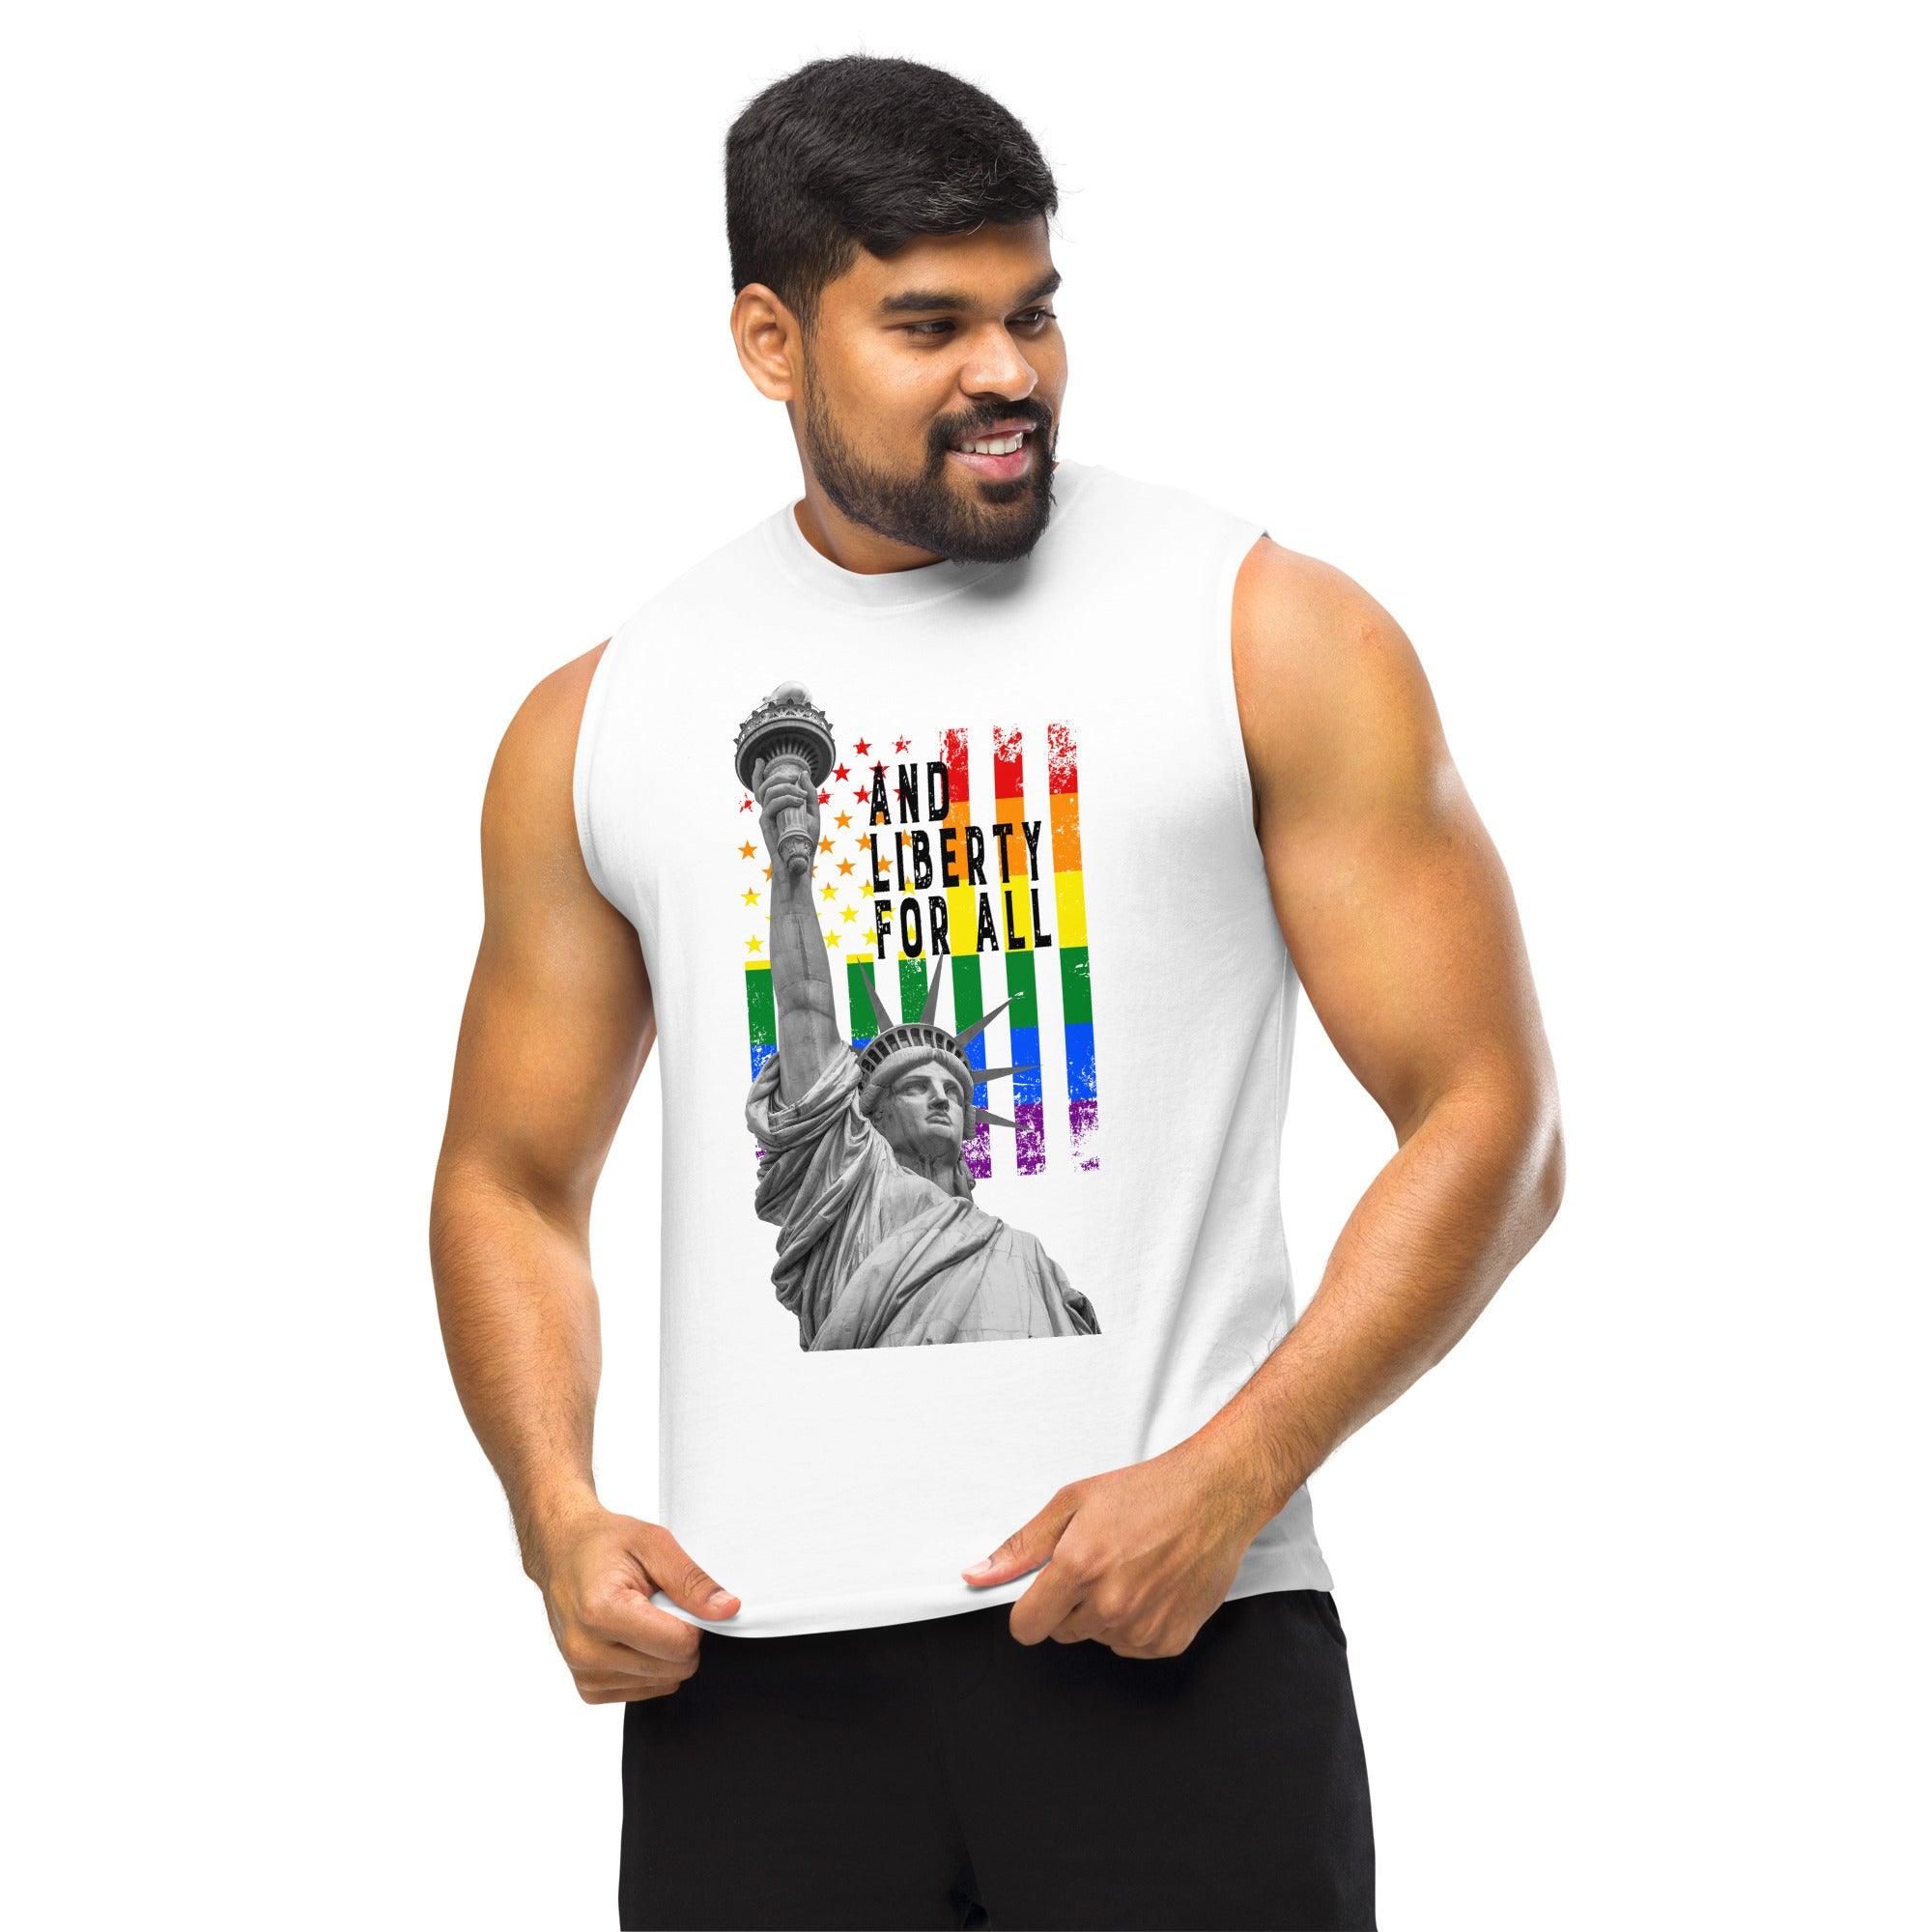 Muscle Shirt-LGBTQ+ And Liberty for All - Elementologie